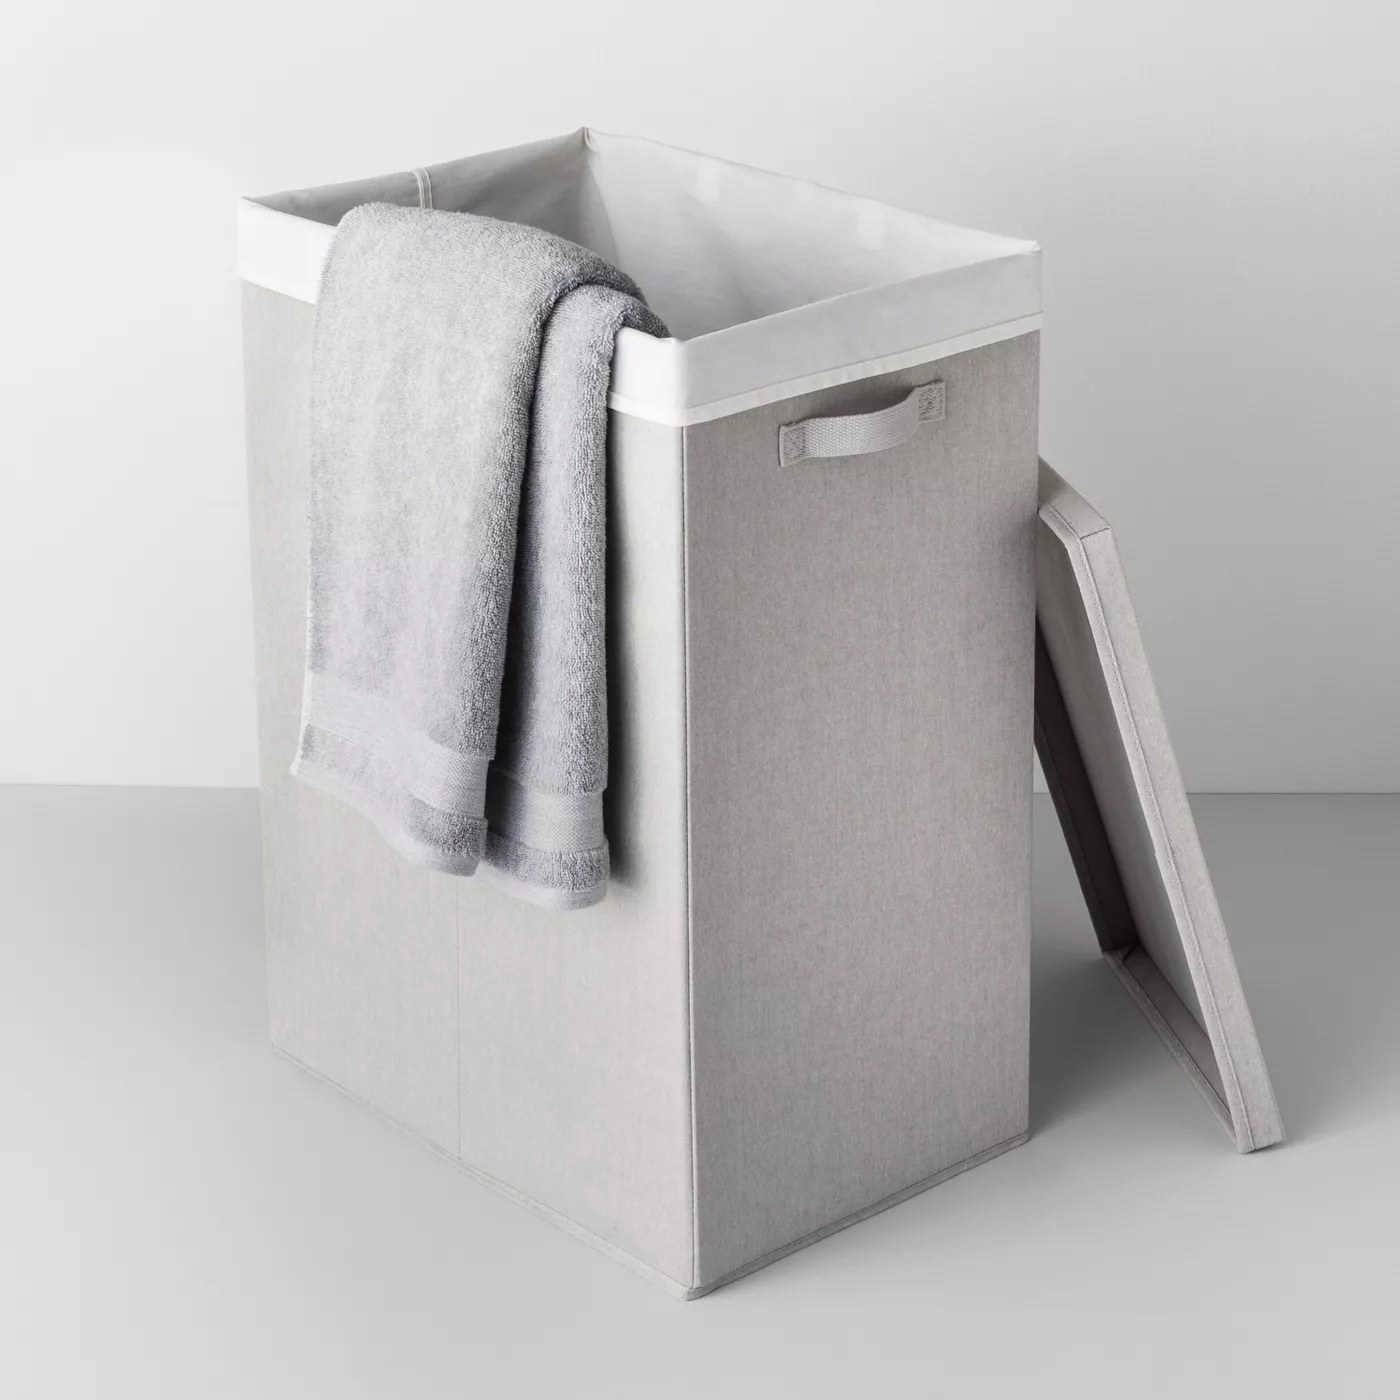 A gray laundry hamper with a gray towel hanging over the lid.